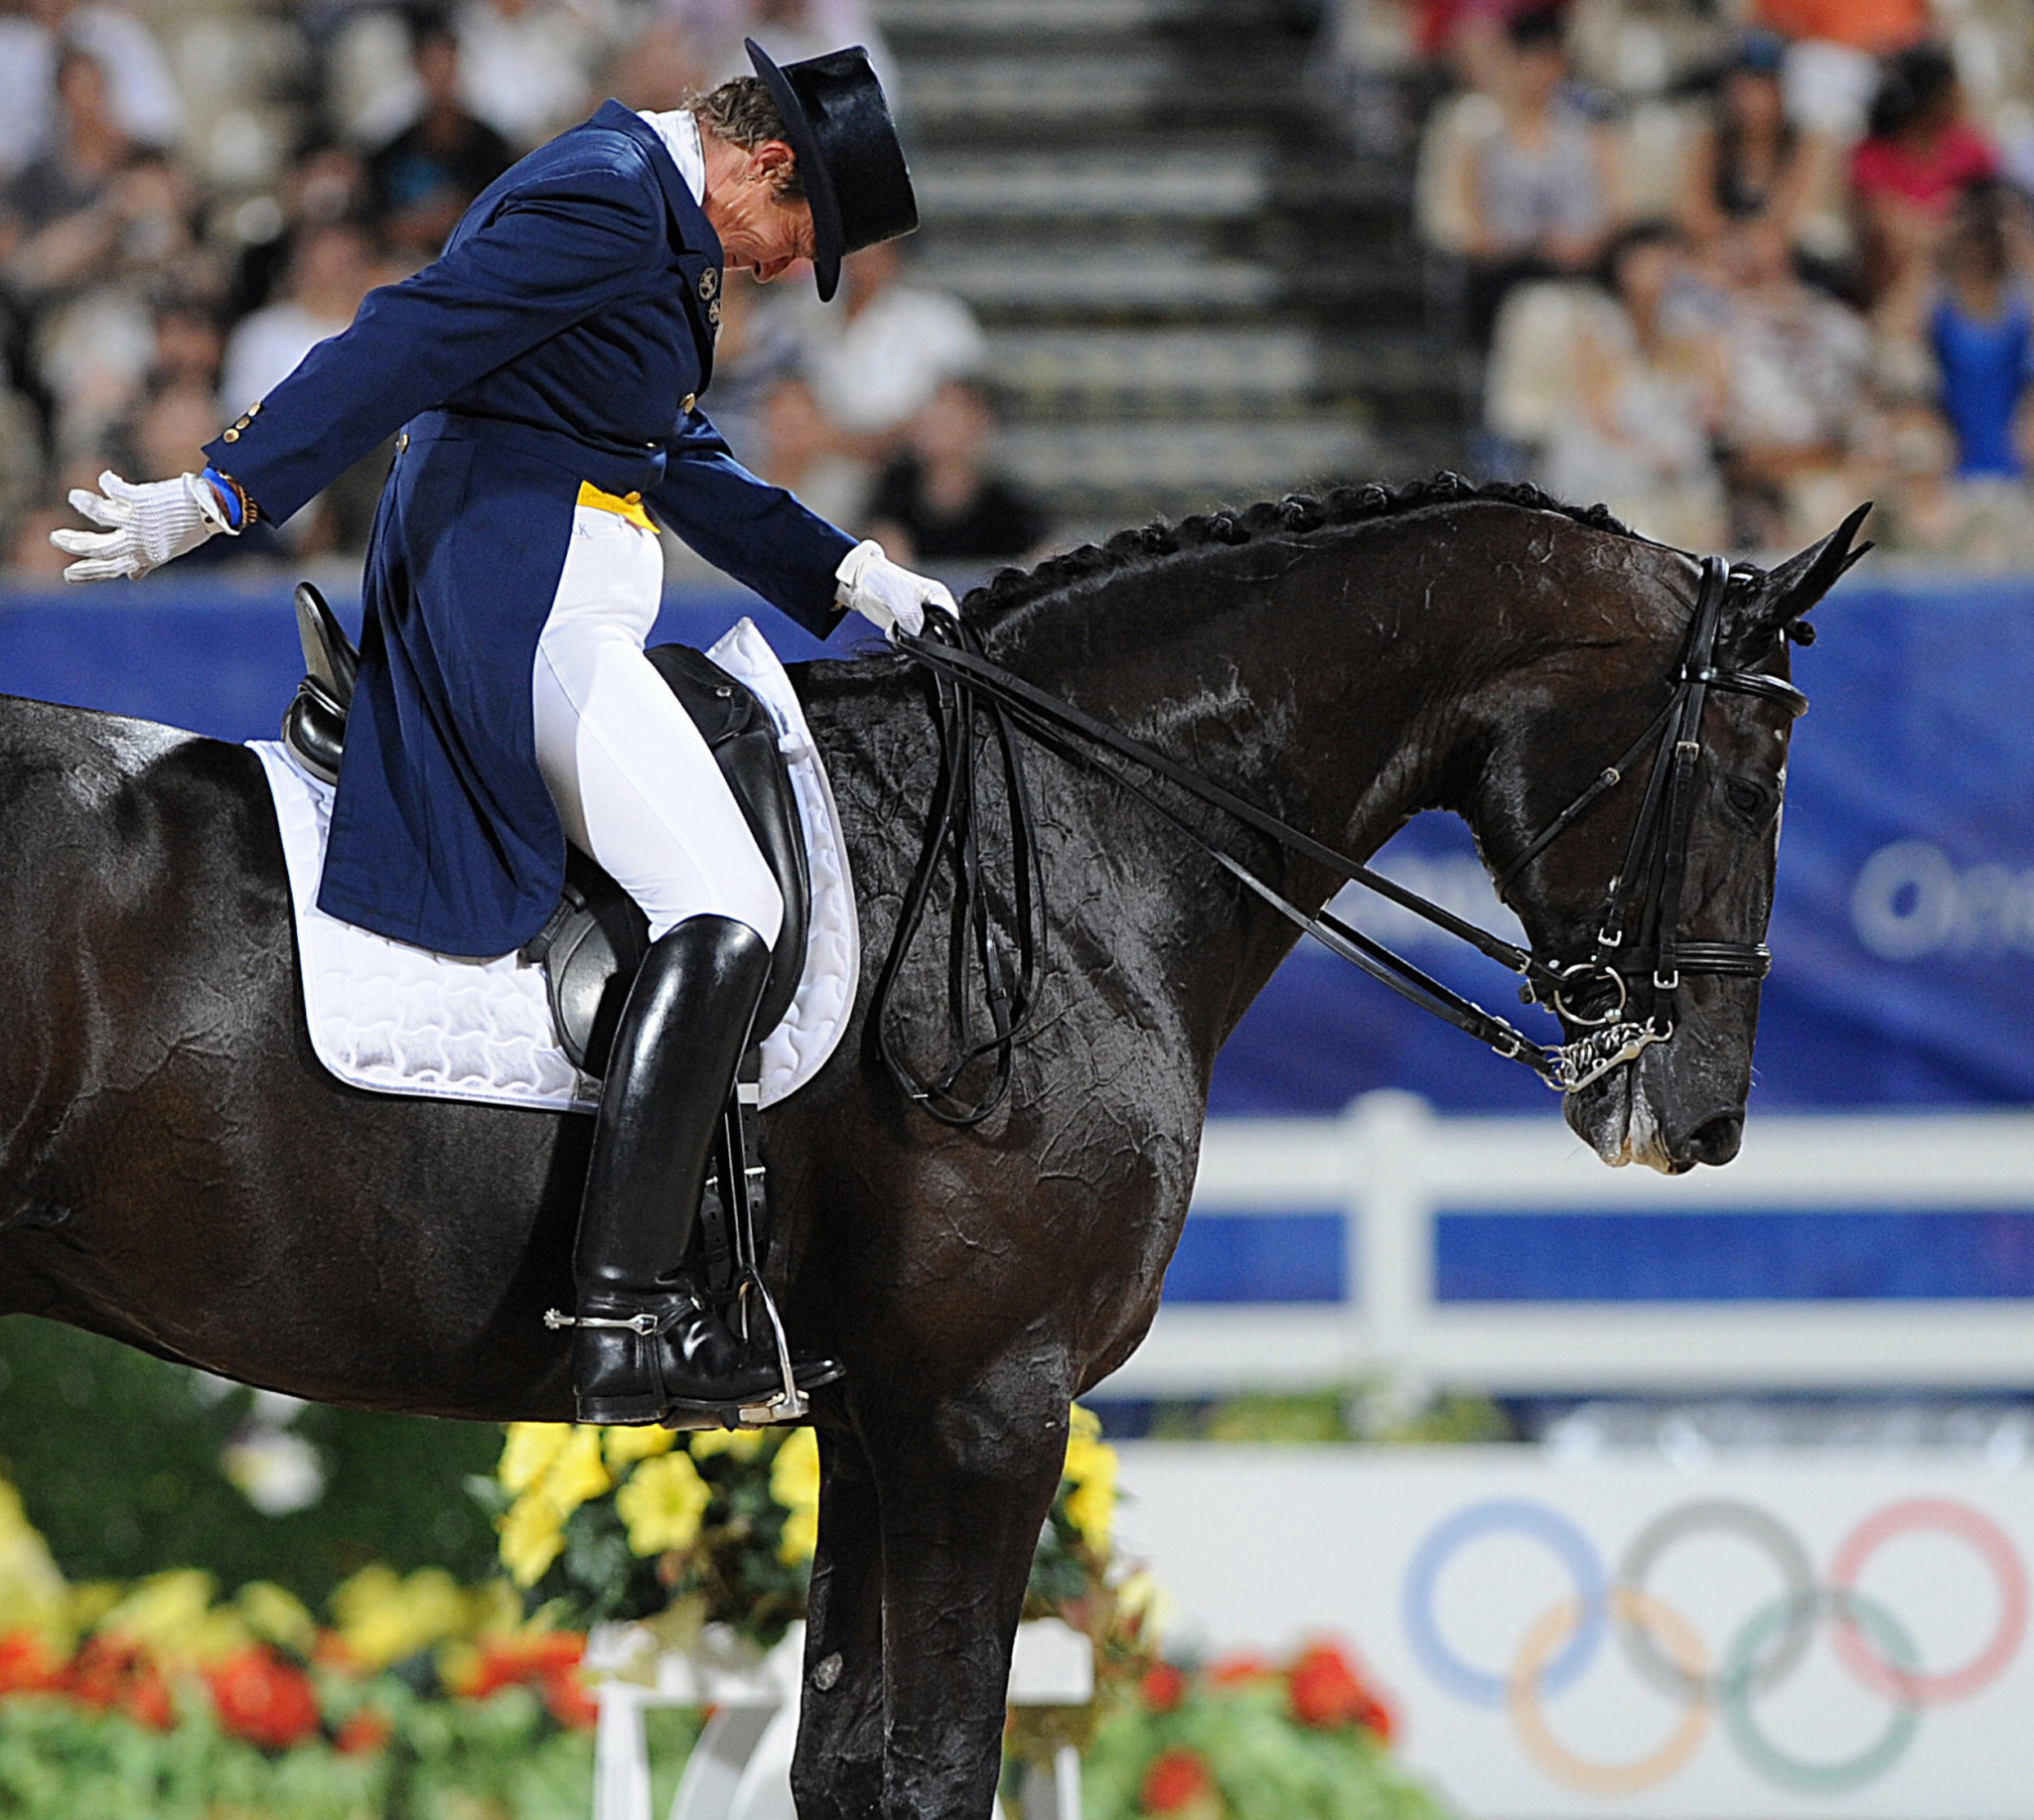 Kyra Kyrklund stepped down as Club of International Dressage Riders chair after 10 years at the helm ©Getty Images